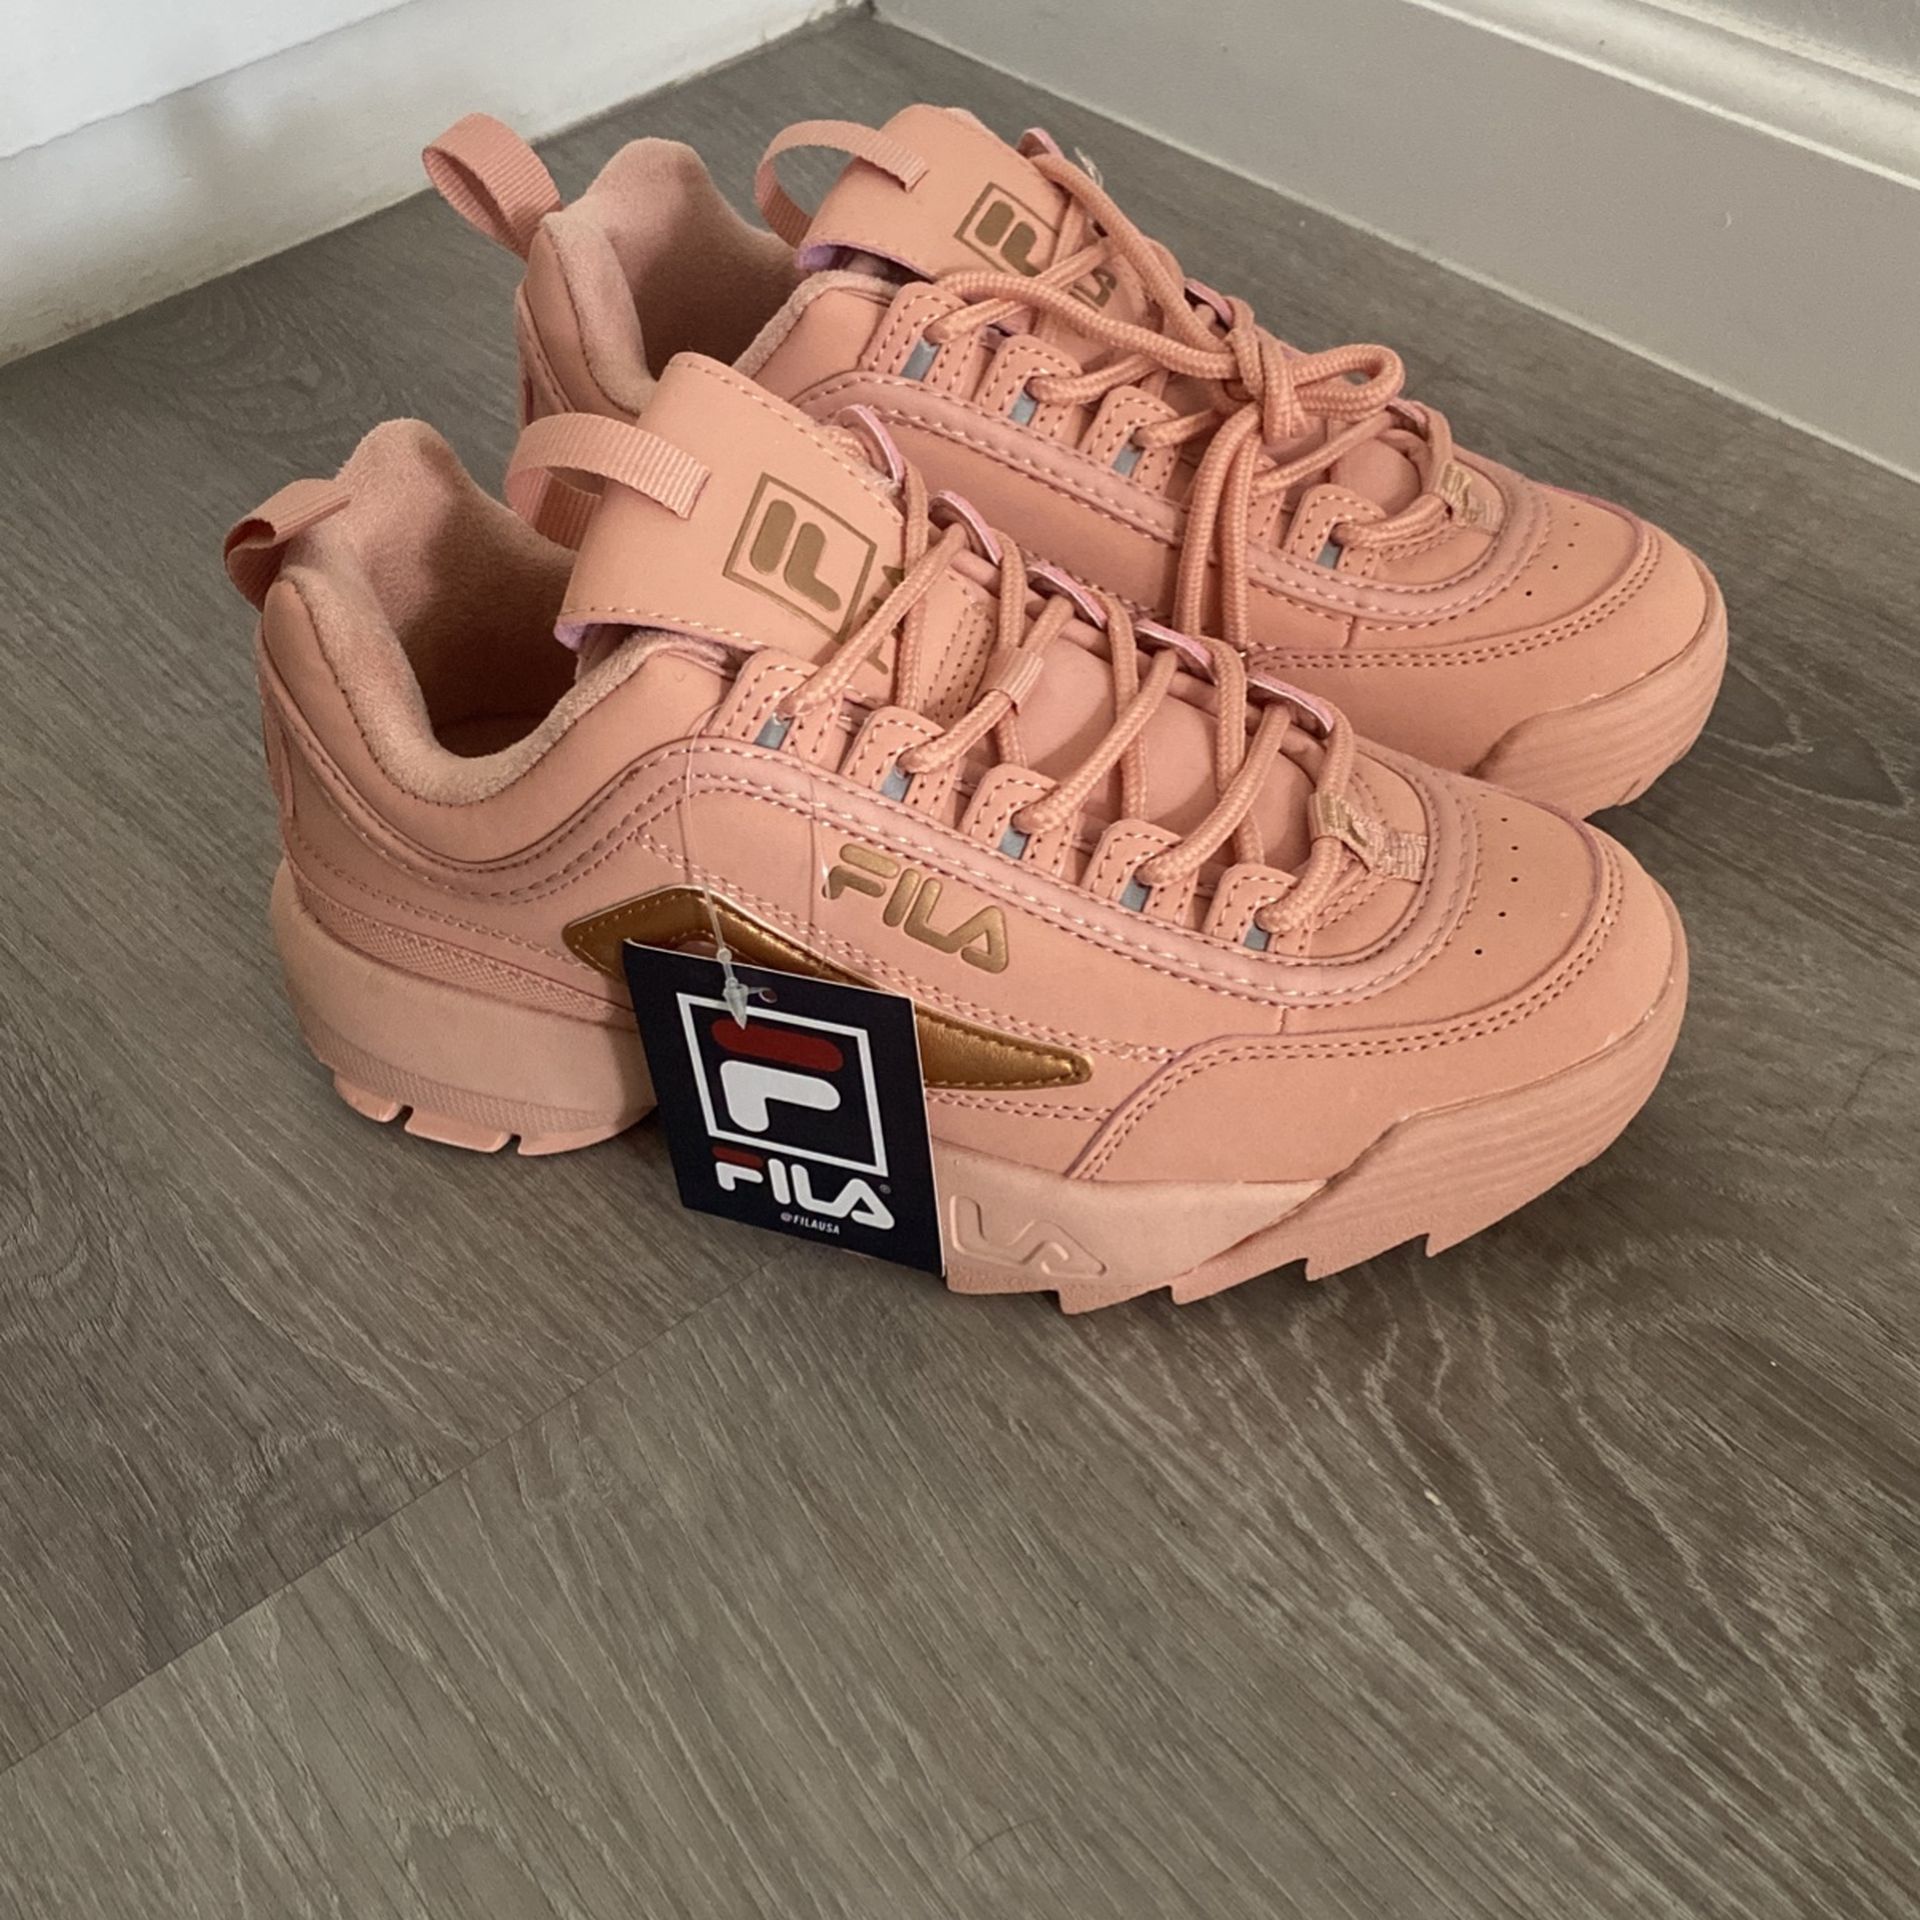 Pink Fila Shoes Limited Edition $100 OBO for Sale in Vista, CA -